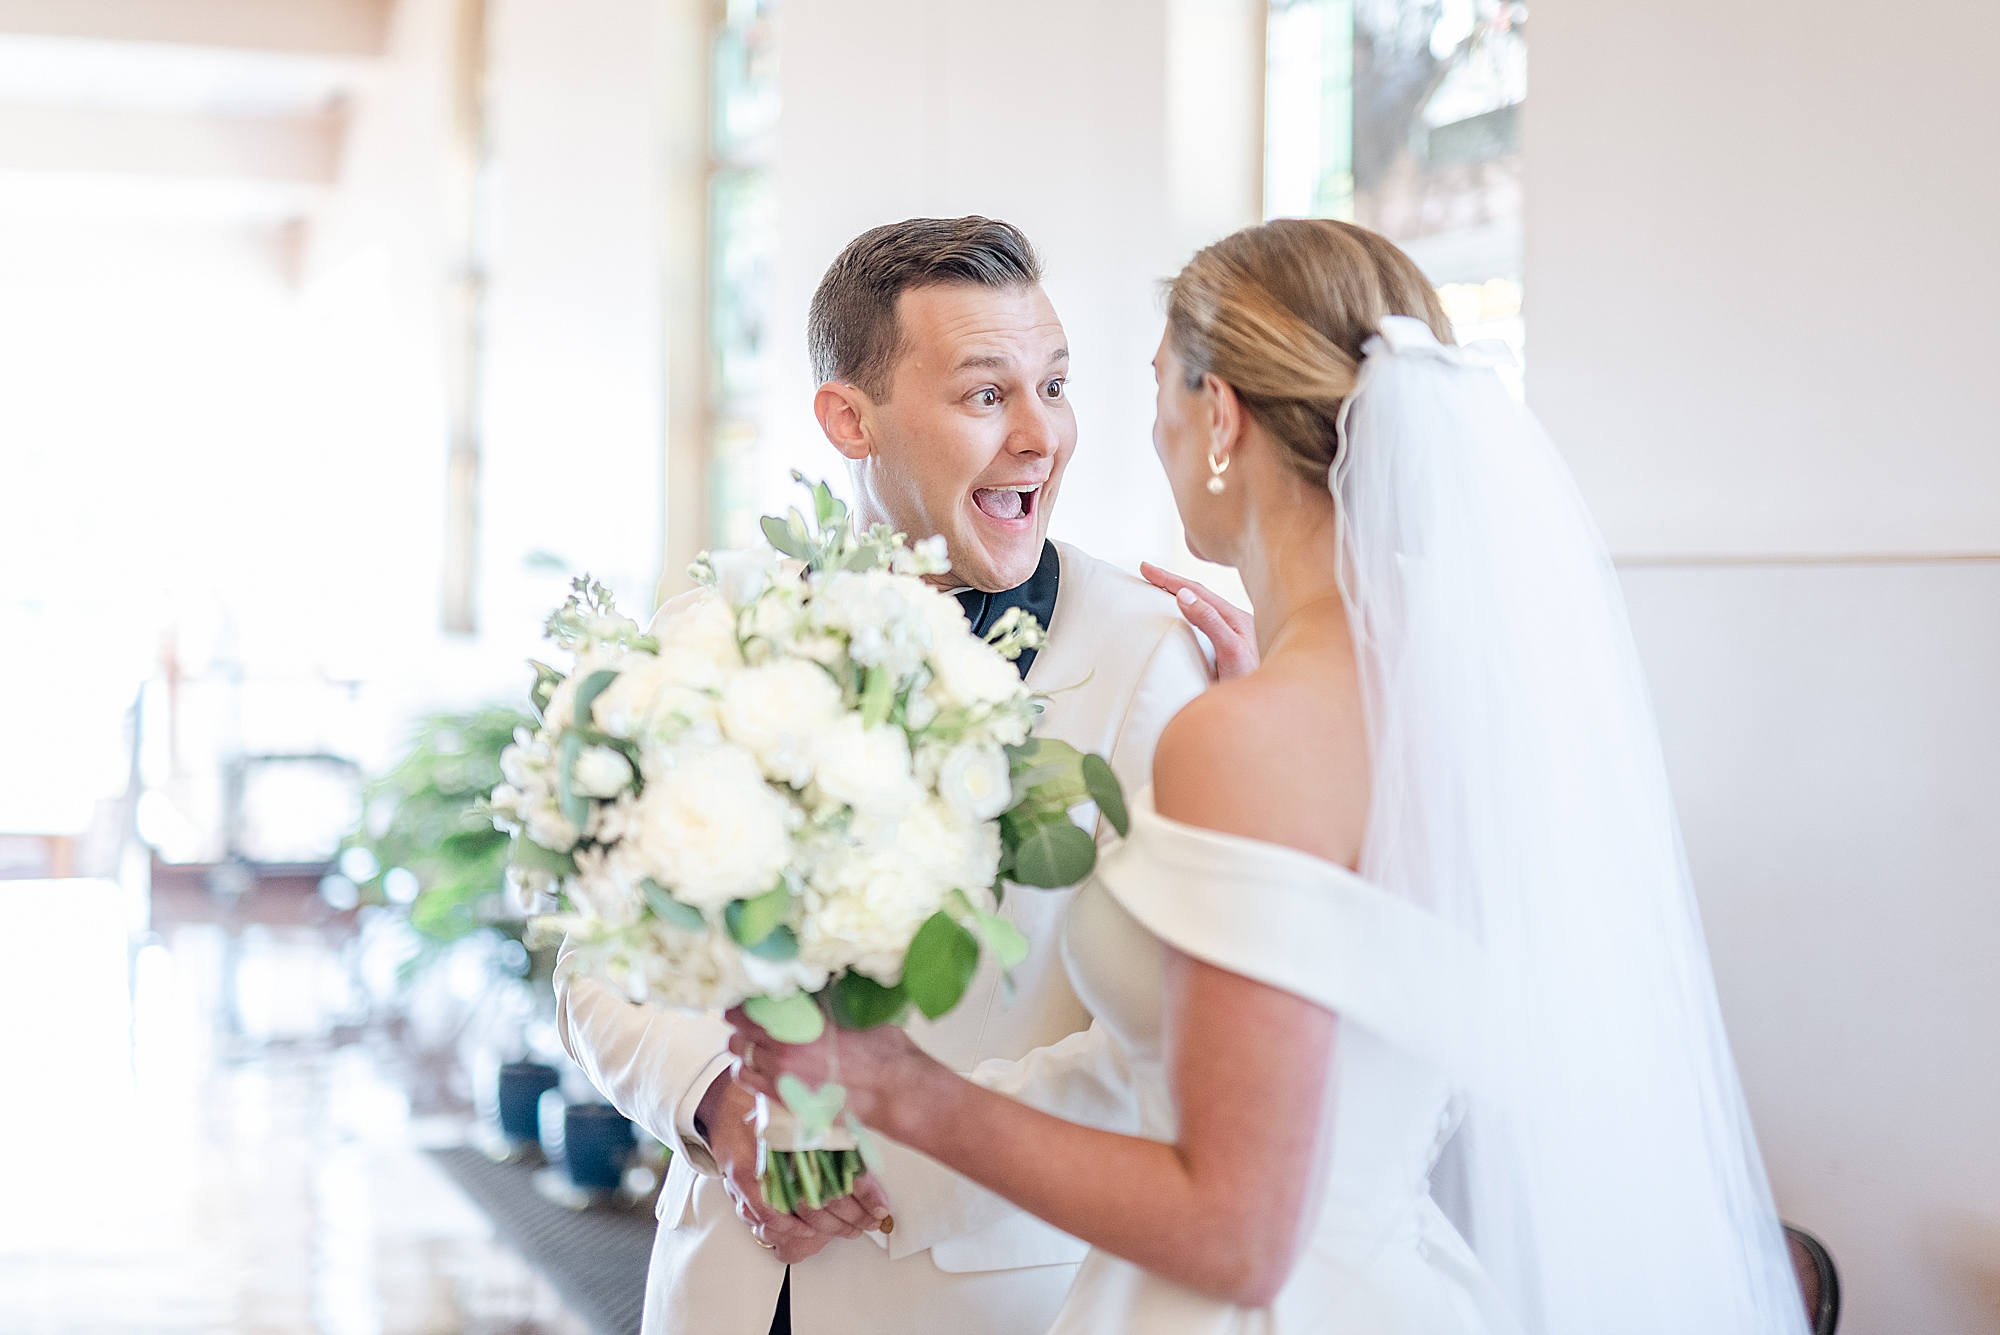 groom laughs with bride outside church wedding ceremony